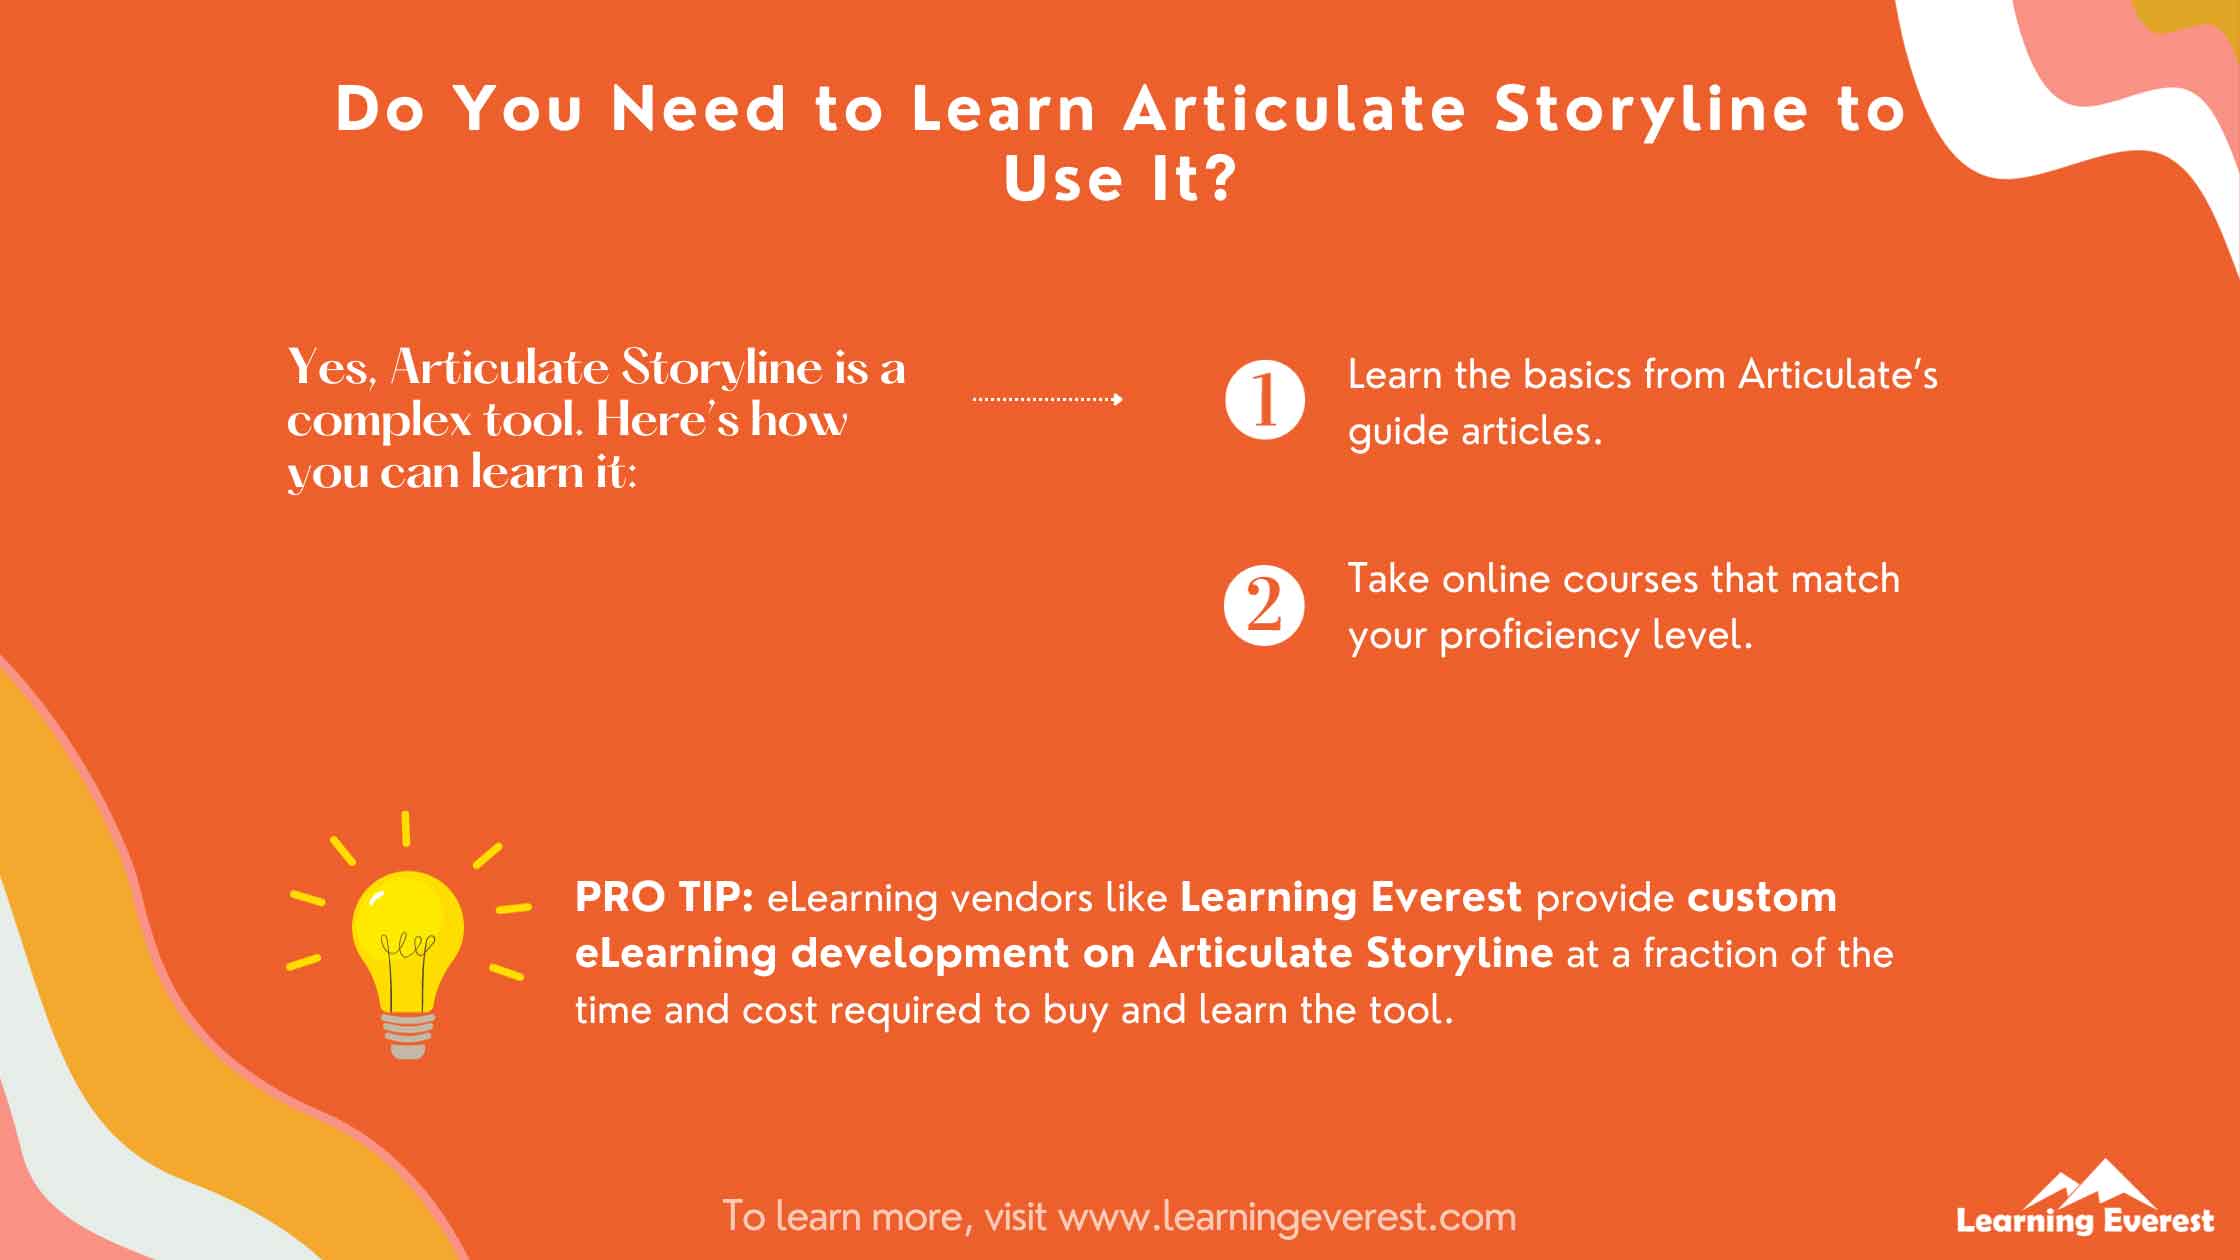 Do You Need to Learn Articulate Storyline to Use It